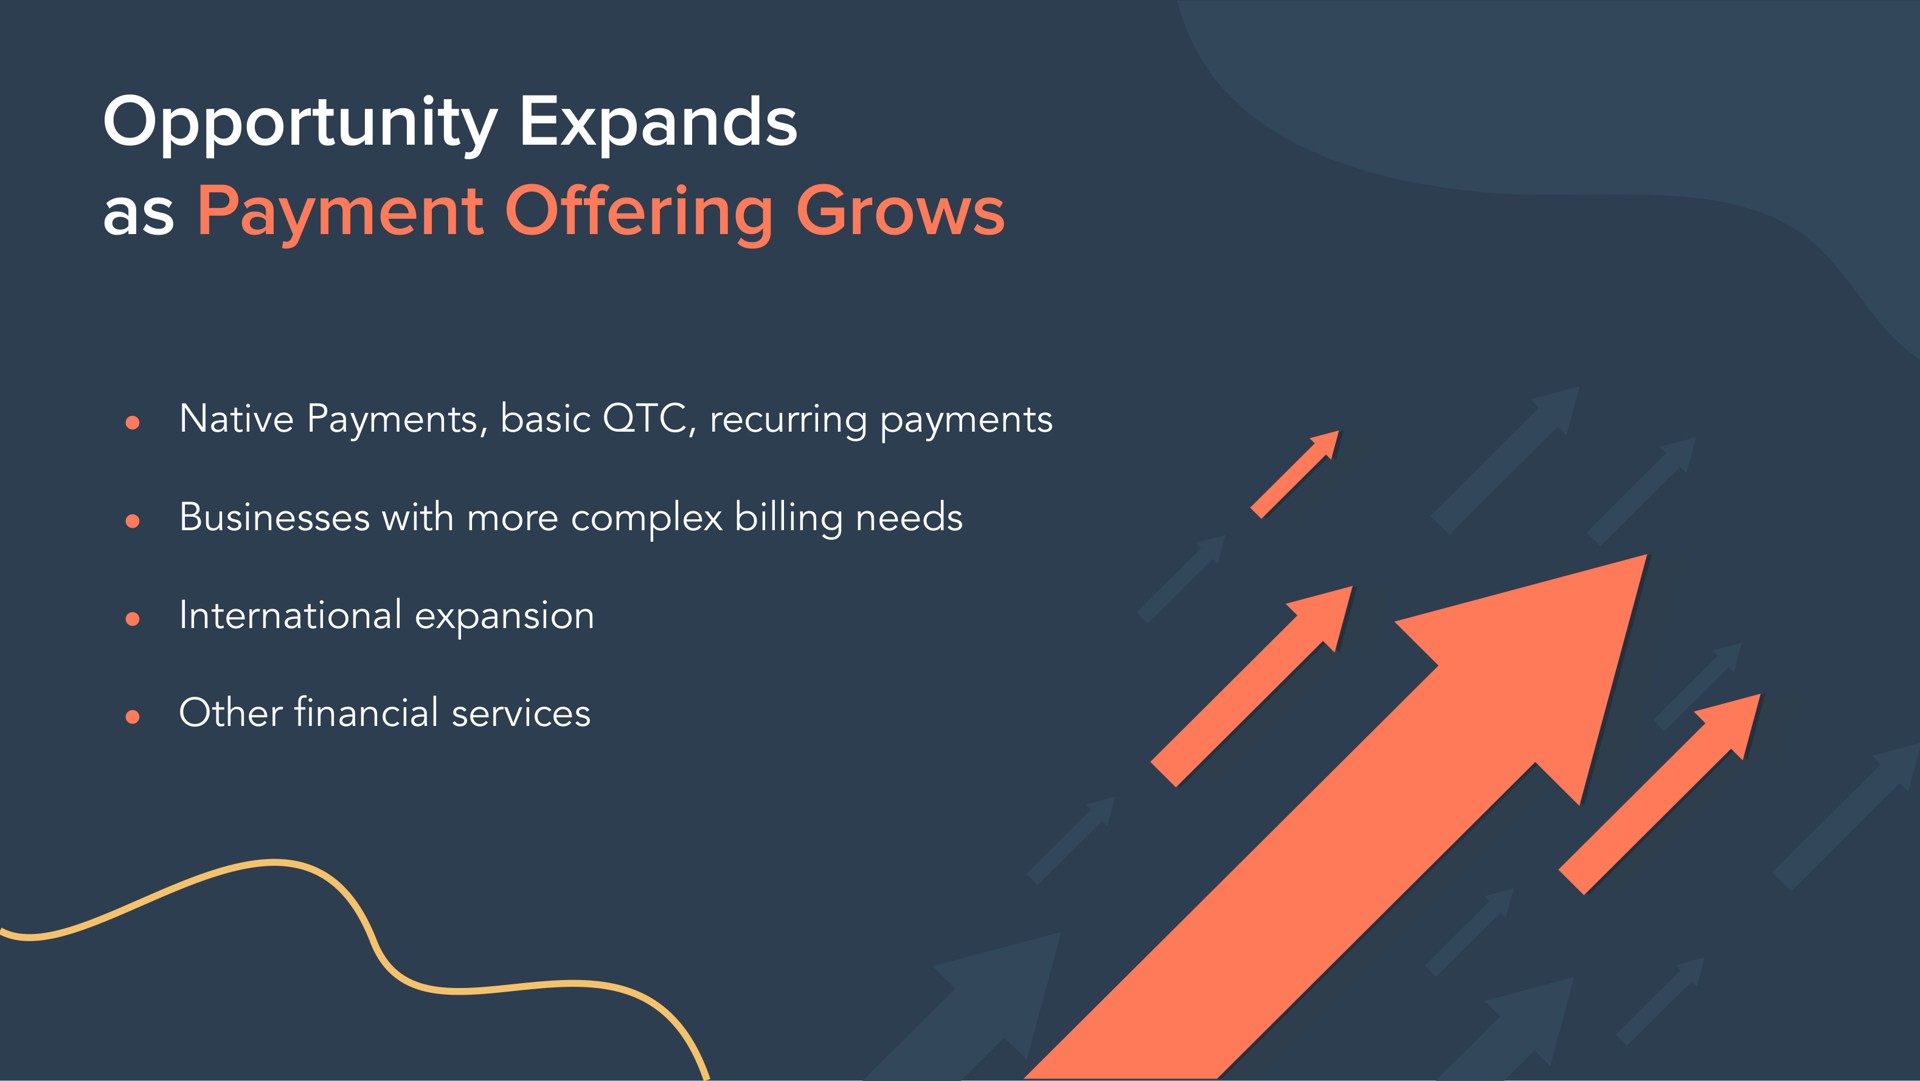 opportunity expands as payment grows offering | Hubspot